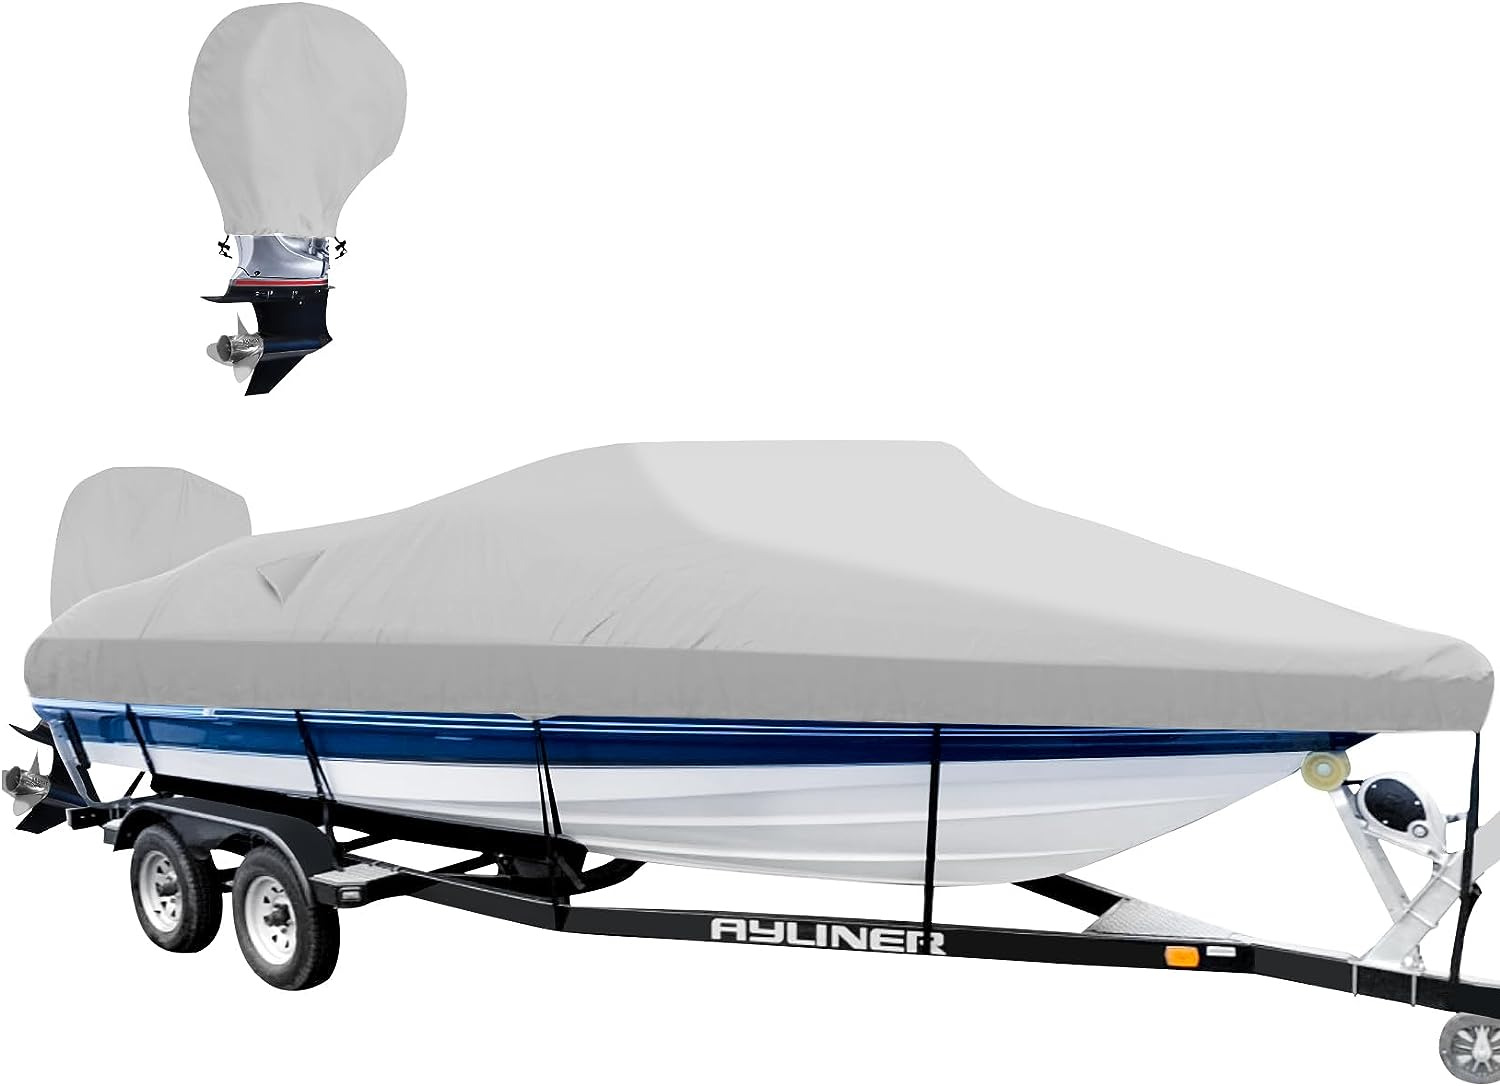 Boat Cover 17-19Ft with Motor Cover,Waterproof 800D Heavy Duty Marine Canvas Tra